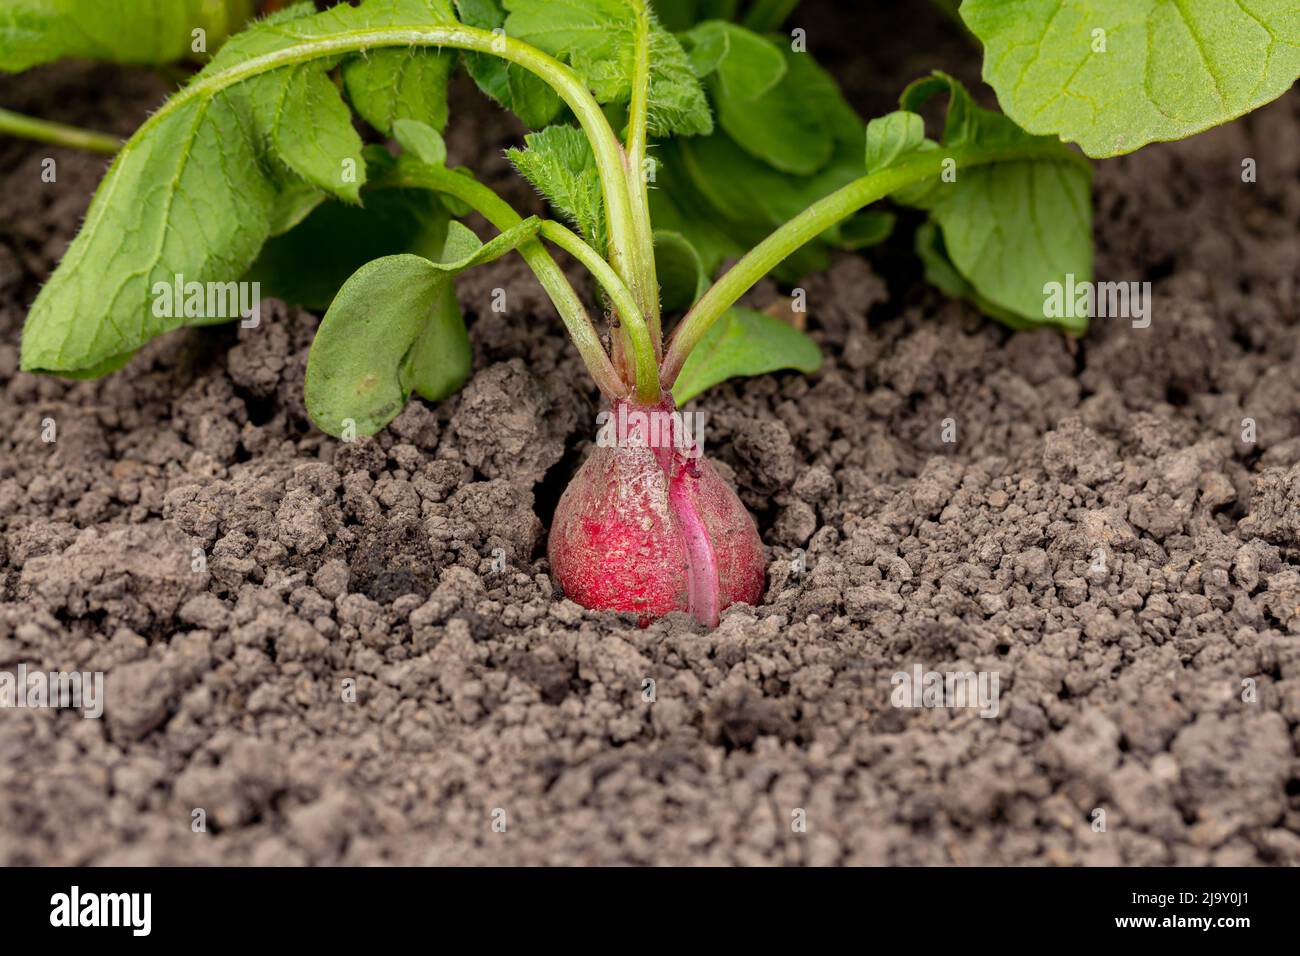 Radish root with split in skin. Gardening, organic vegetable garden and agriculture concept. Stock Photo